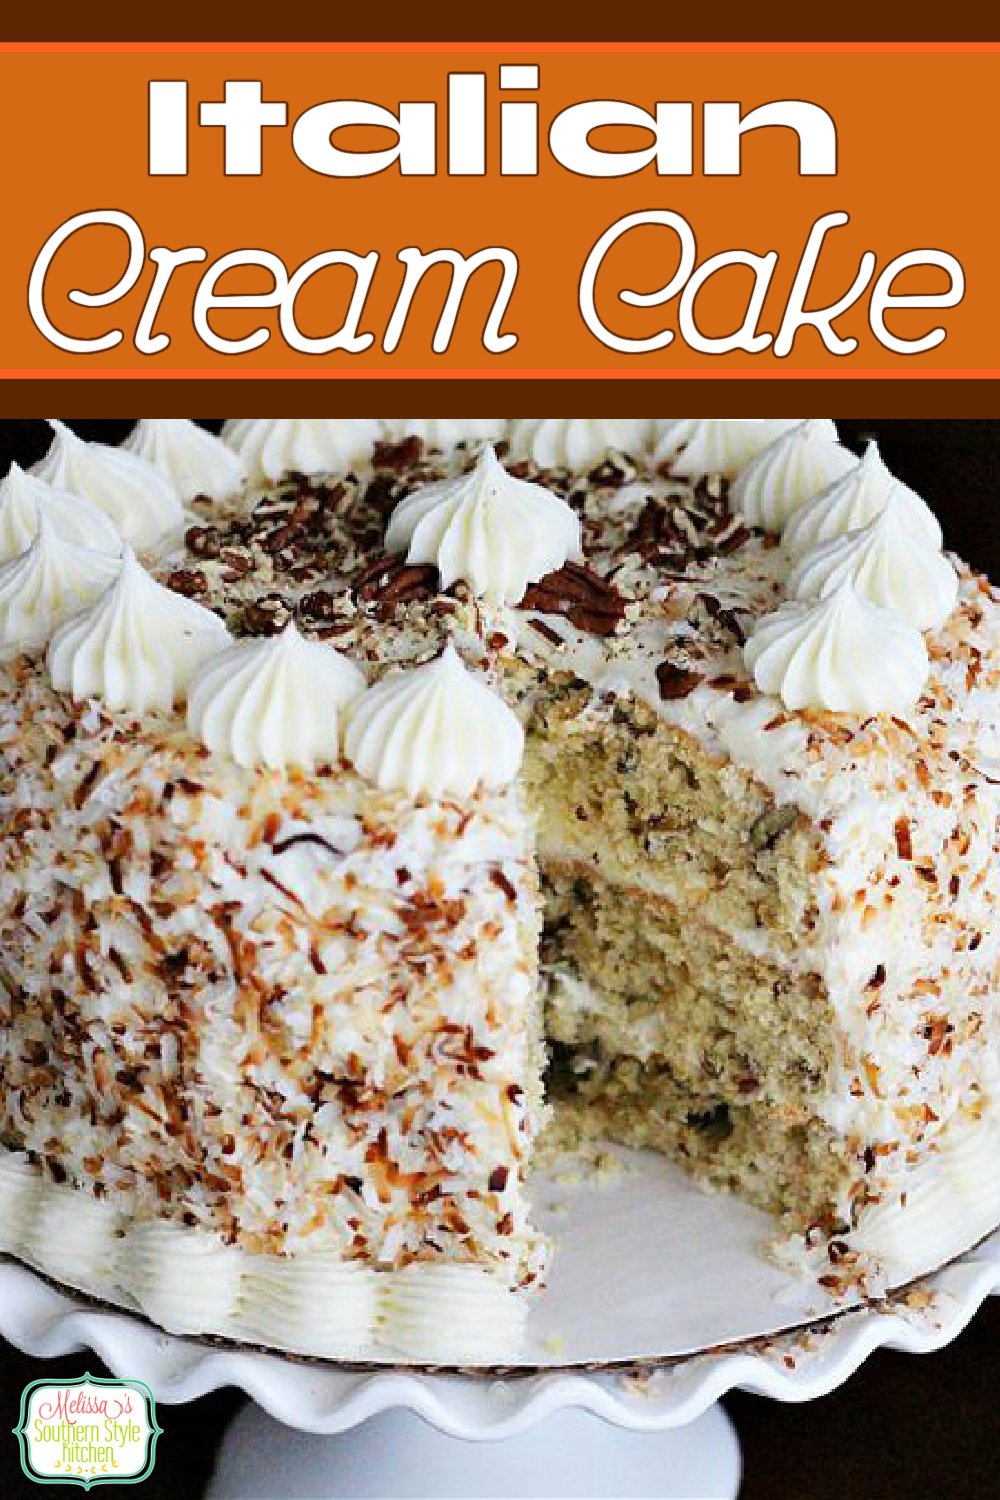 Turn any occasion into something special with this amazing Italian Cream Cake #italiancreamcake #cake #layercake #desserts #dessertfoodrecipes #sweets #southernfood #southernrecipes #easter #christmas #thanskgiving #holidayrecipes